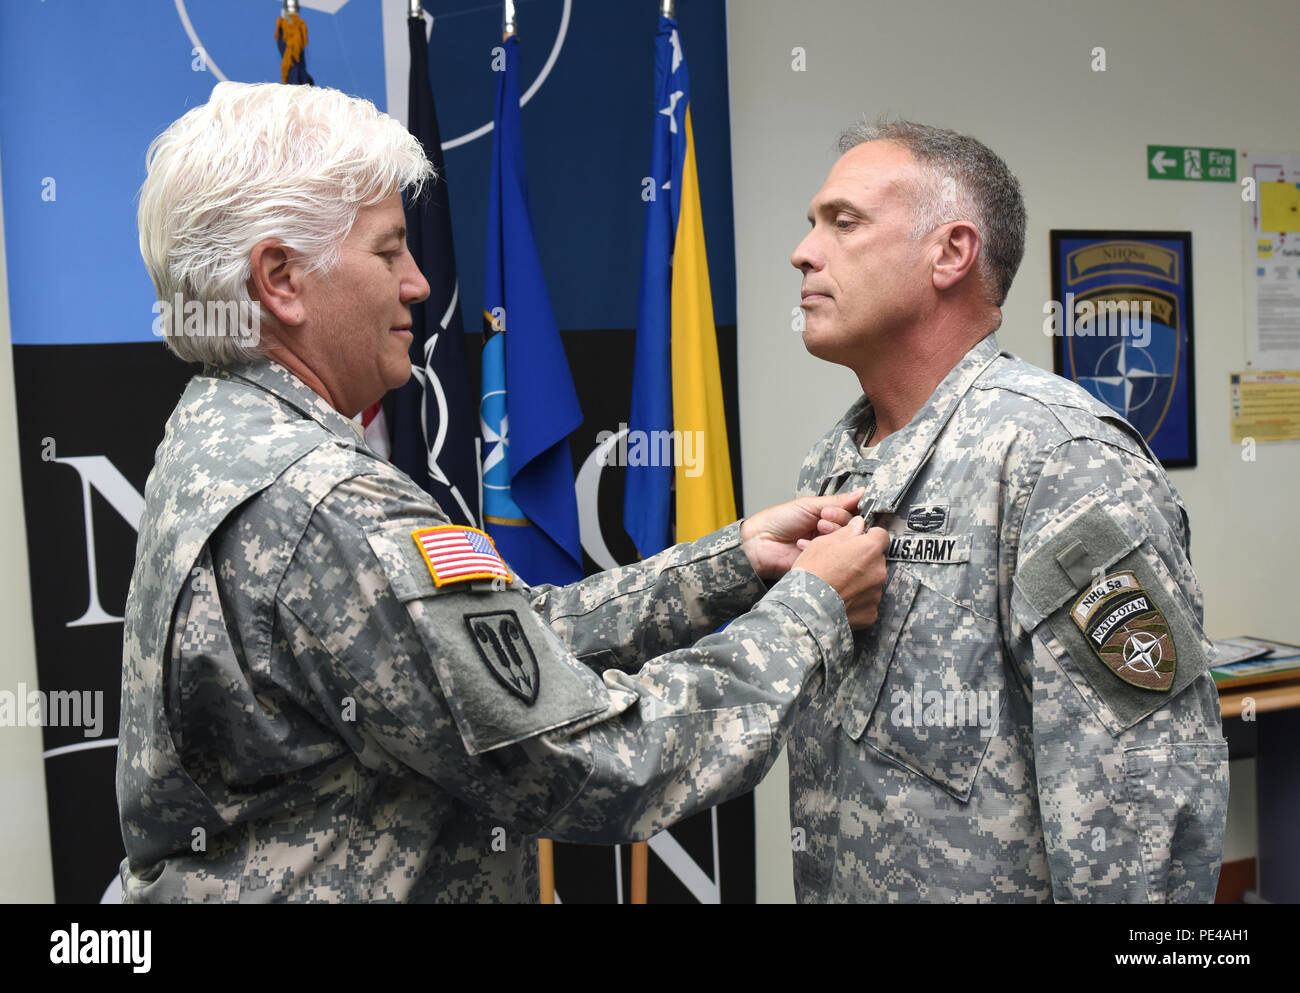 U.S. Army Brig. Gen. Giselle Wilz, NATO Headquarters Sarajevo commander, awards Command Sgt. Maj. Harley Schwind, NHQSa command senior enlisted leader, with the Legion of Merit Medal Sept. 7, 2015, at Camp Butmir in Sarajevo, Bosnia and Herzegovina. Schwind received the medal for exceptionally meritorious service to the North Dakota Army National Guard. He also received the state Legion of Merit Medal.  (U.S. Air Force photo by Master Sgt. JT May III) Stock Photo